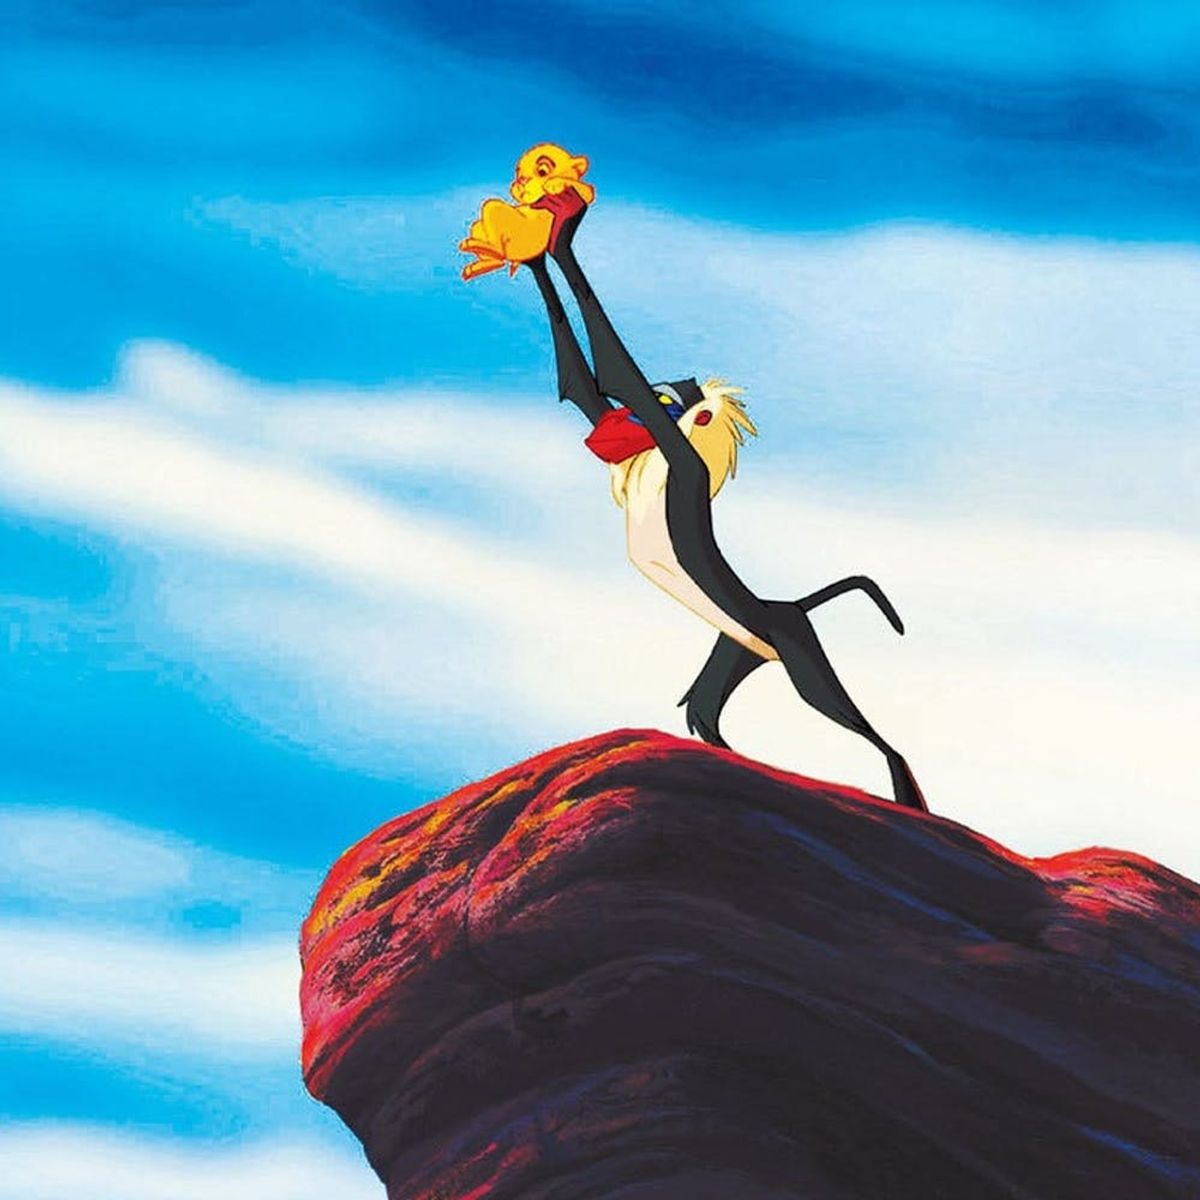 25 Things You Probably Didn’t Know About “The Lion King”